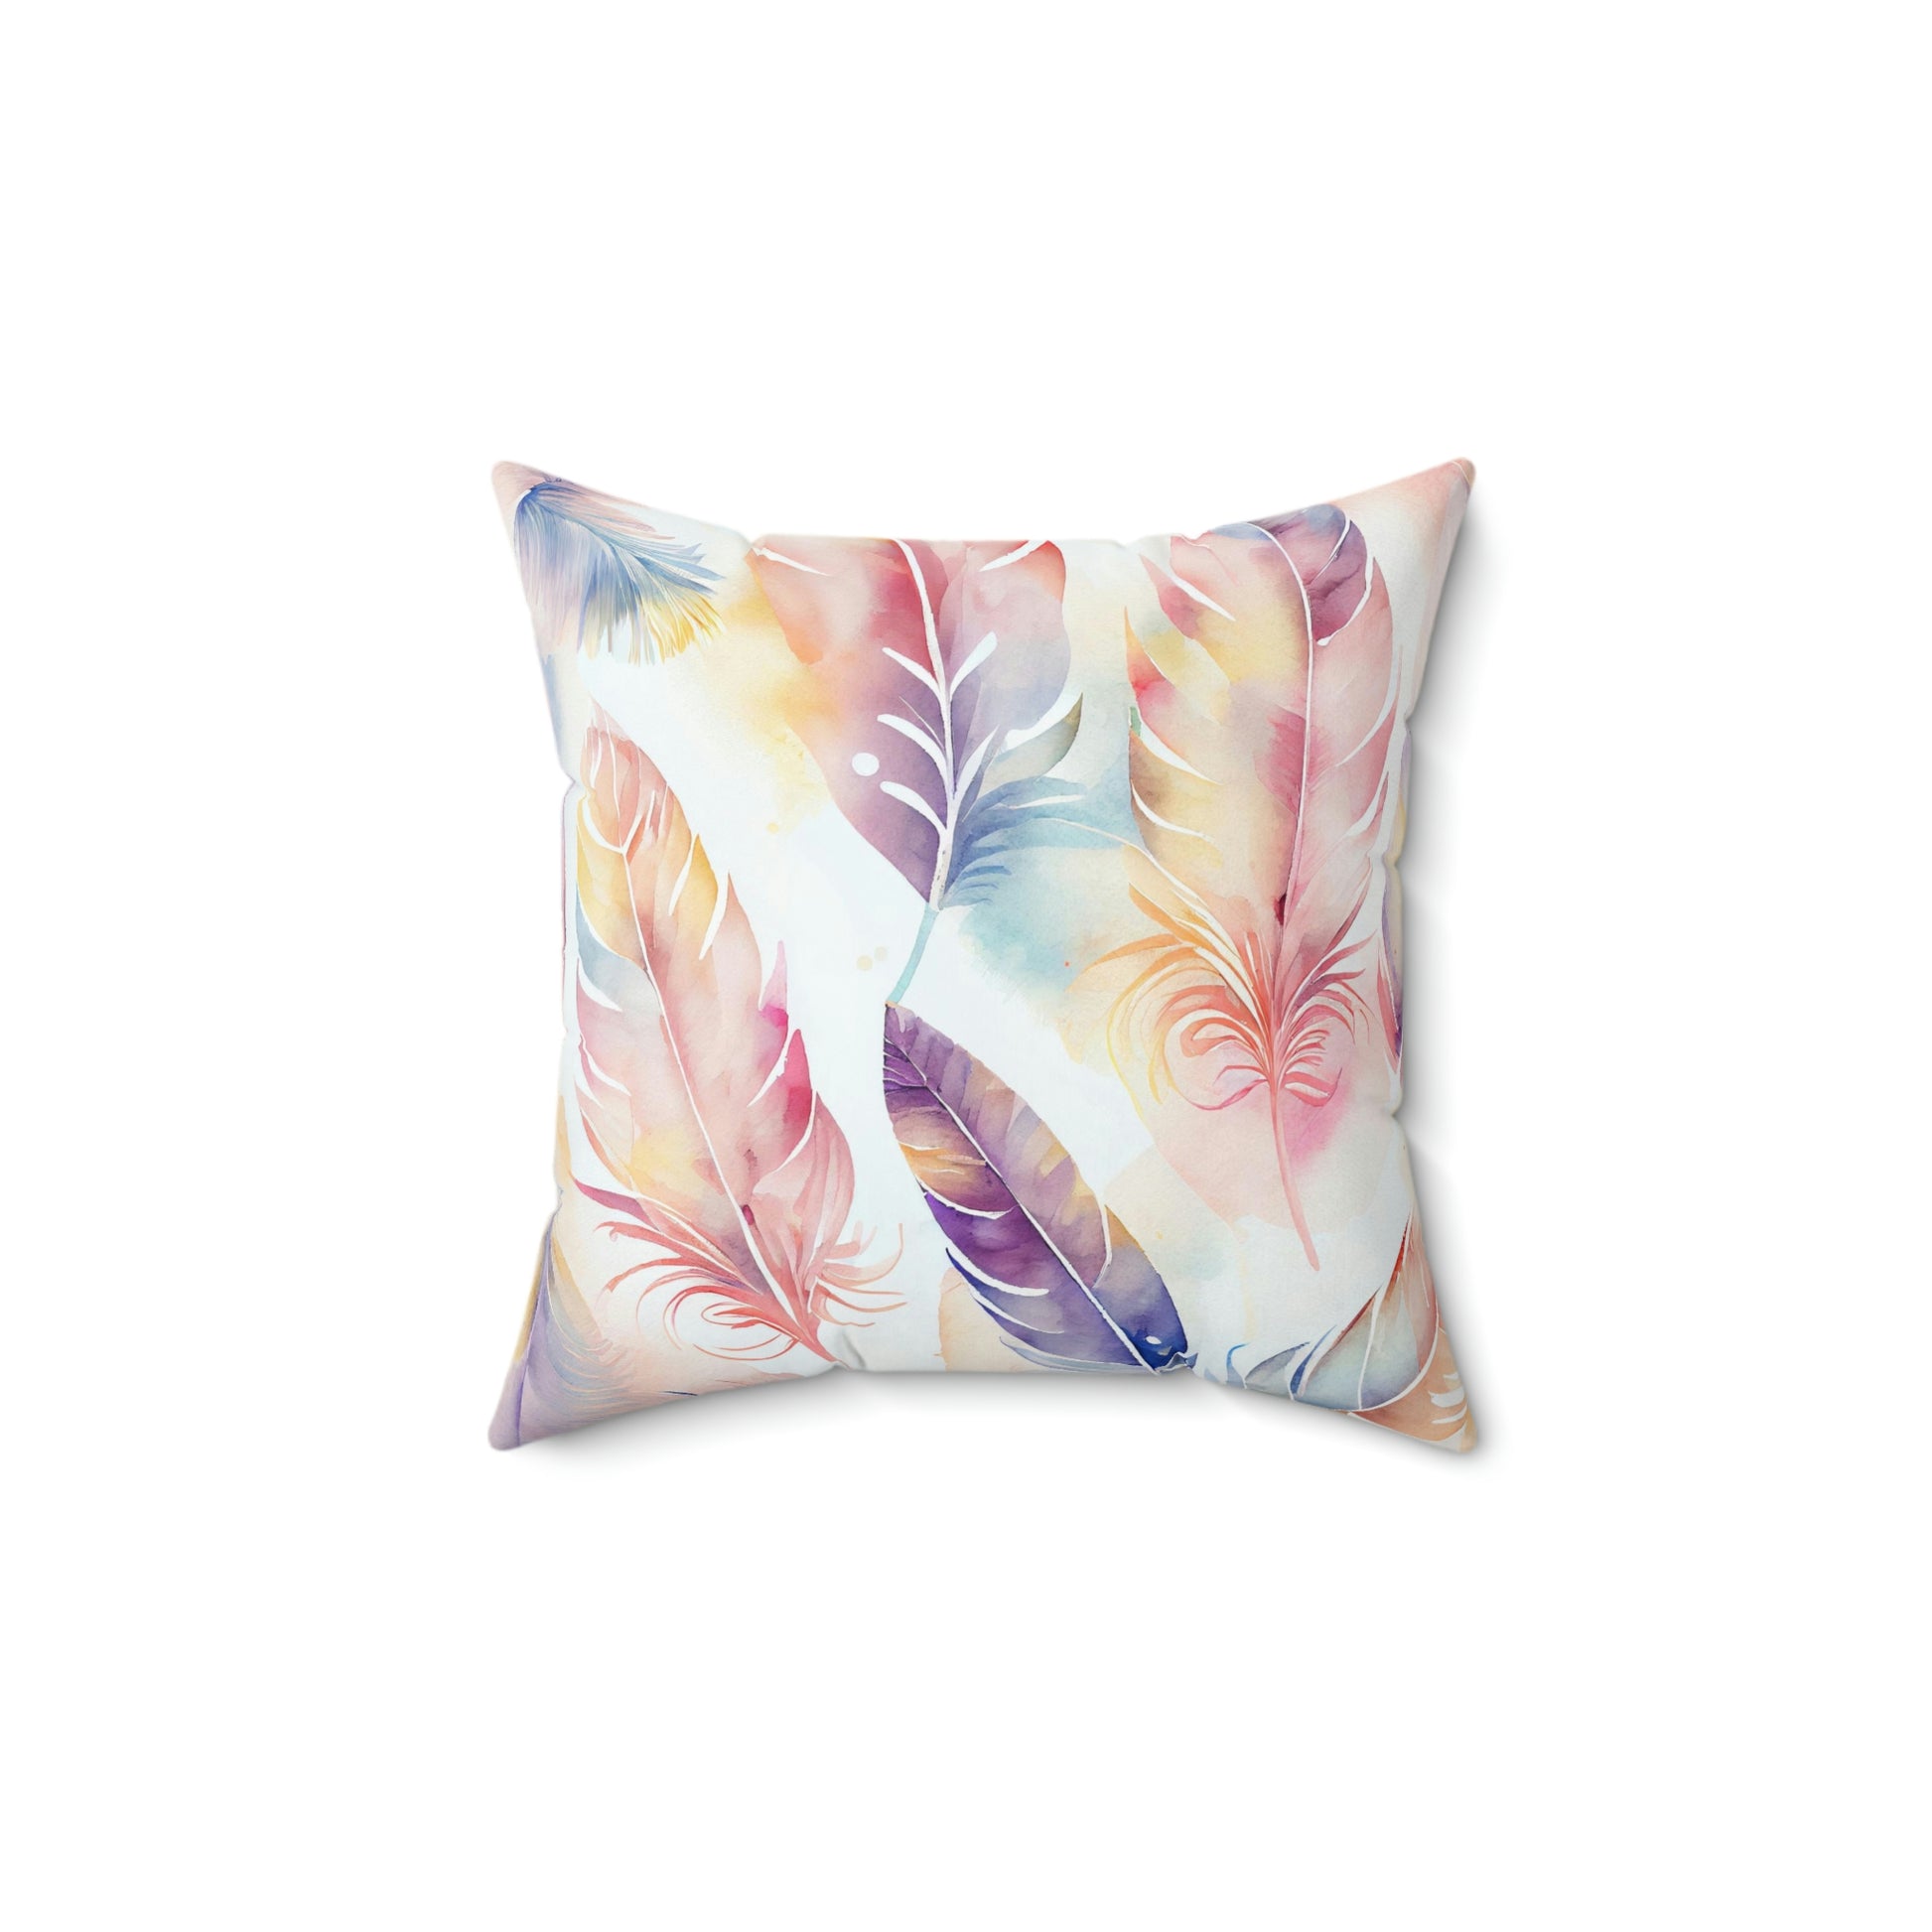 this is a feather pattern pillow sitting on a sofa, feather throw pillow on an arm chair, feather pillow for your home decor, style your space with a watercolor feather pillow